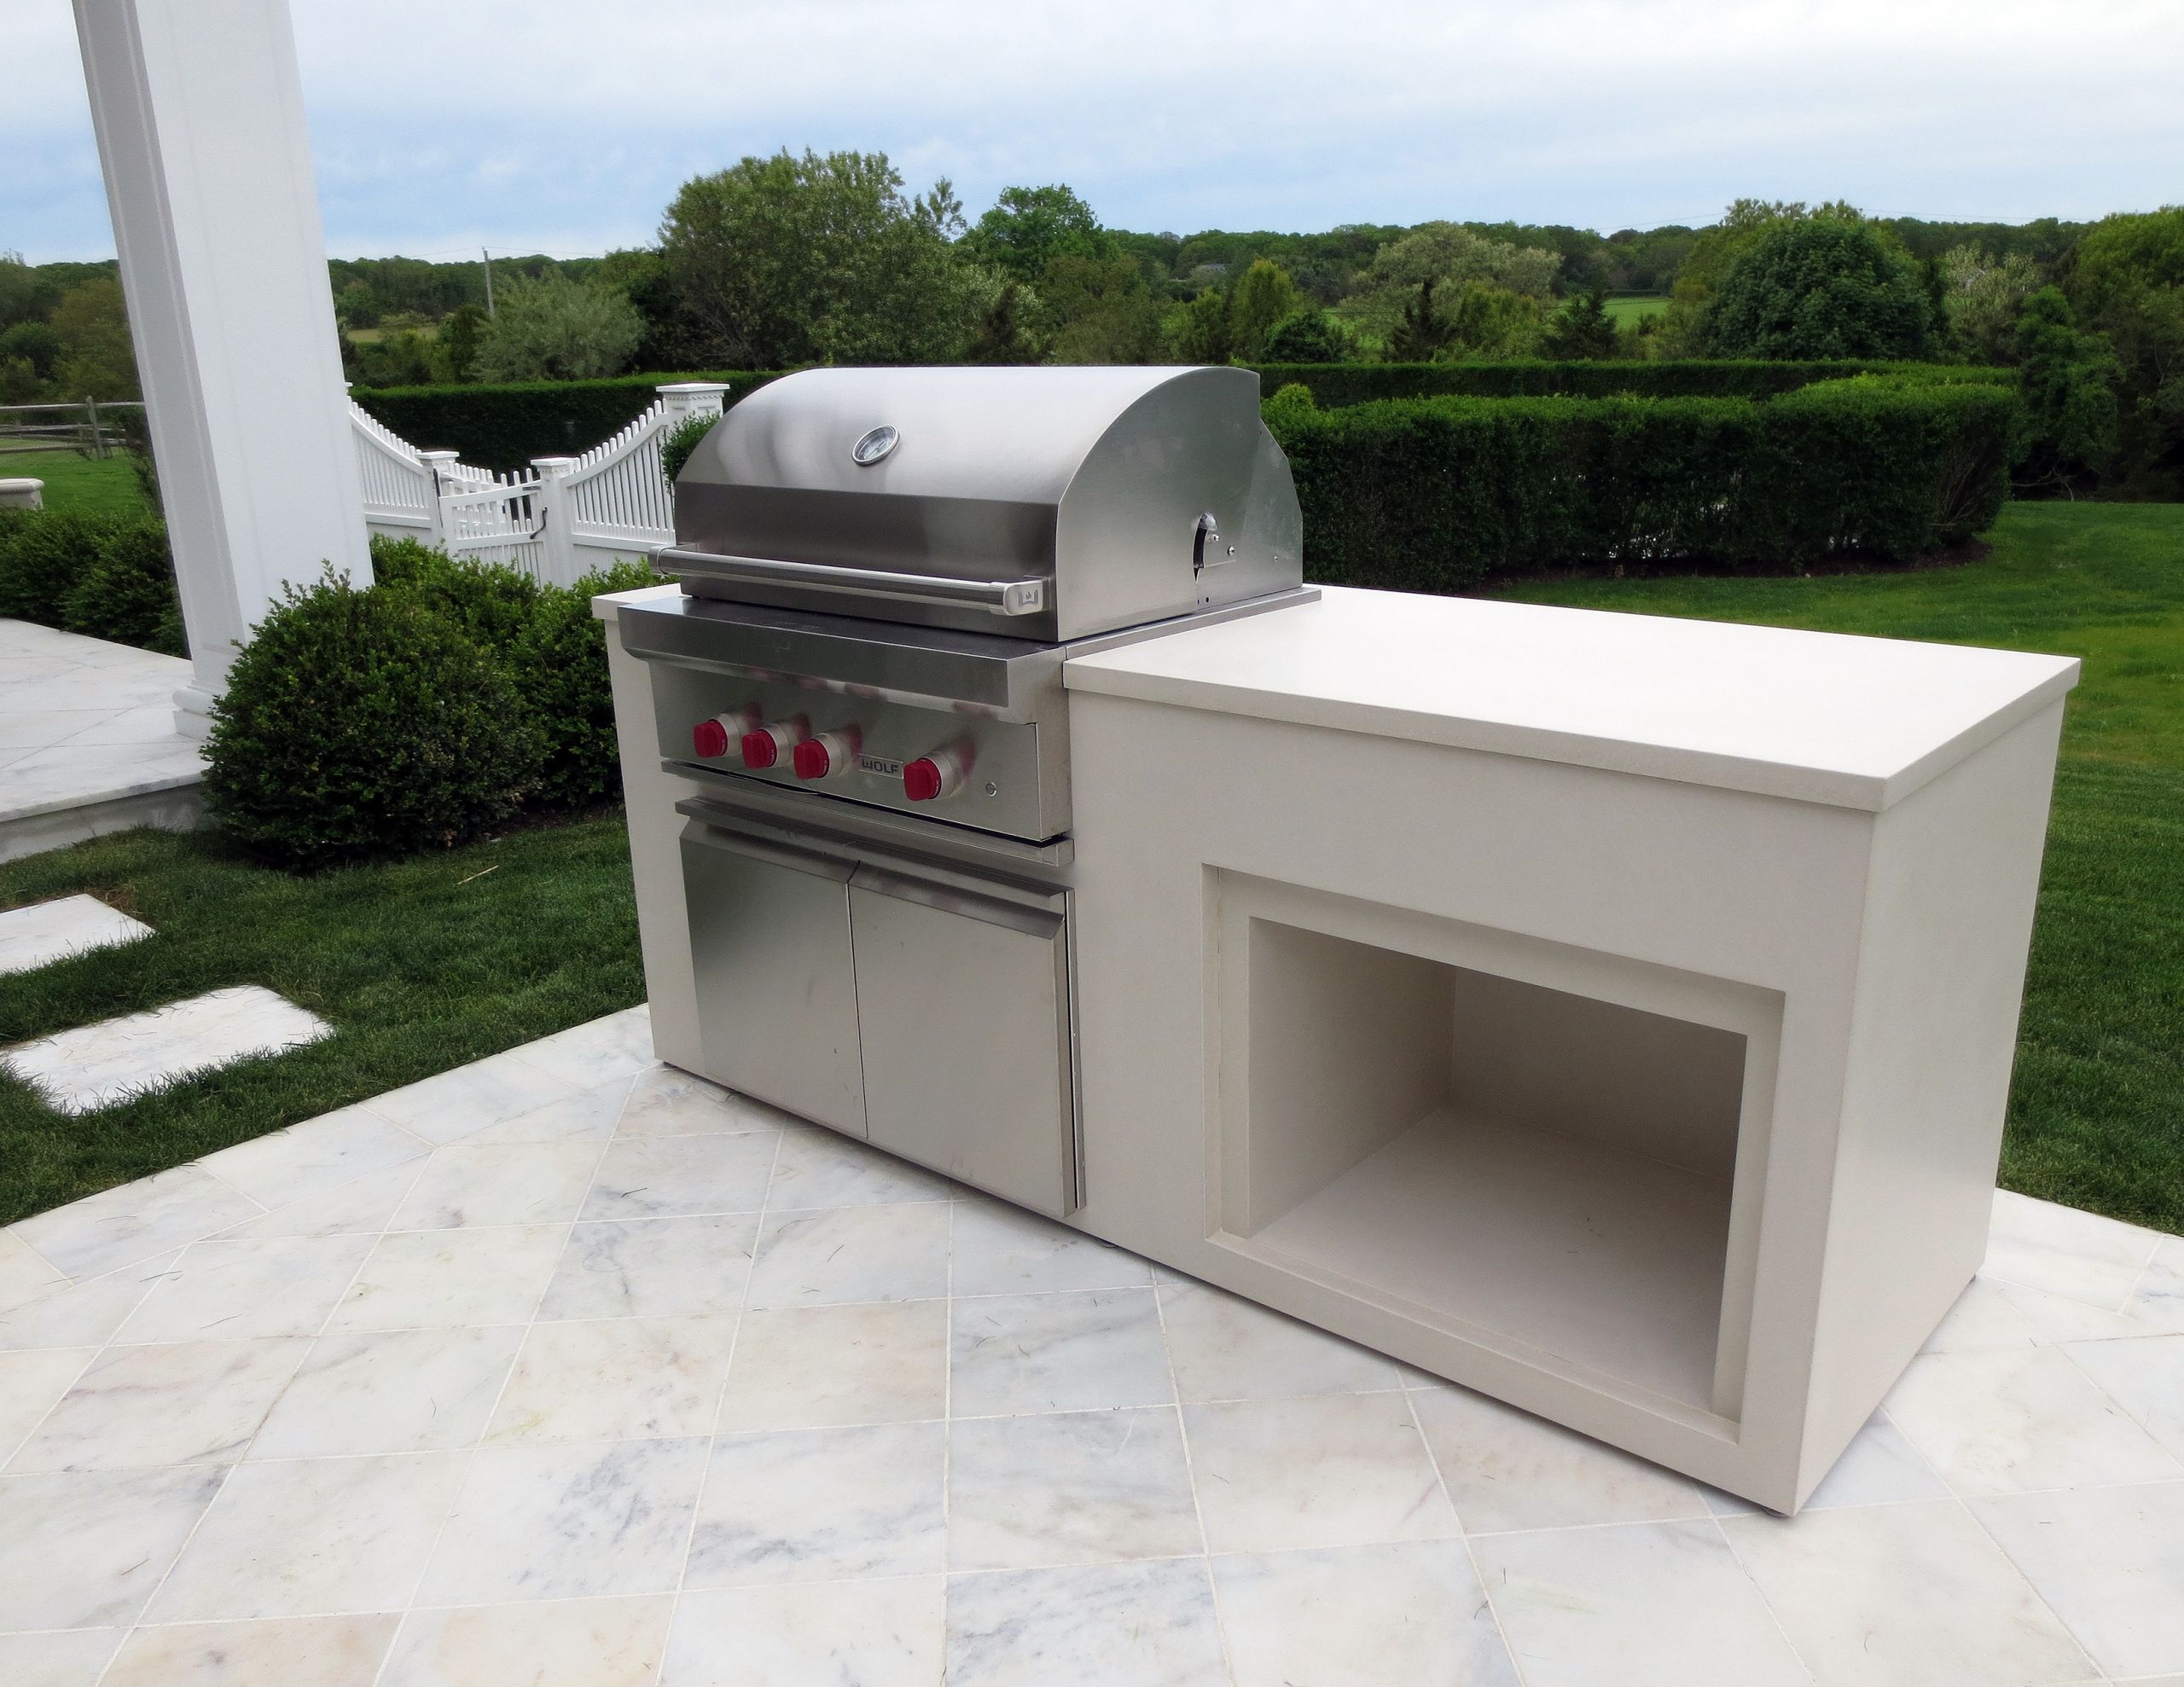 Backyard Grill Grills
 Outdoor kitchen Wolf Grill unit